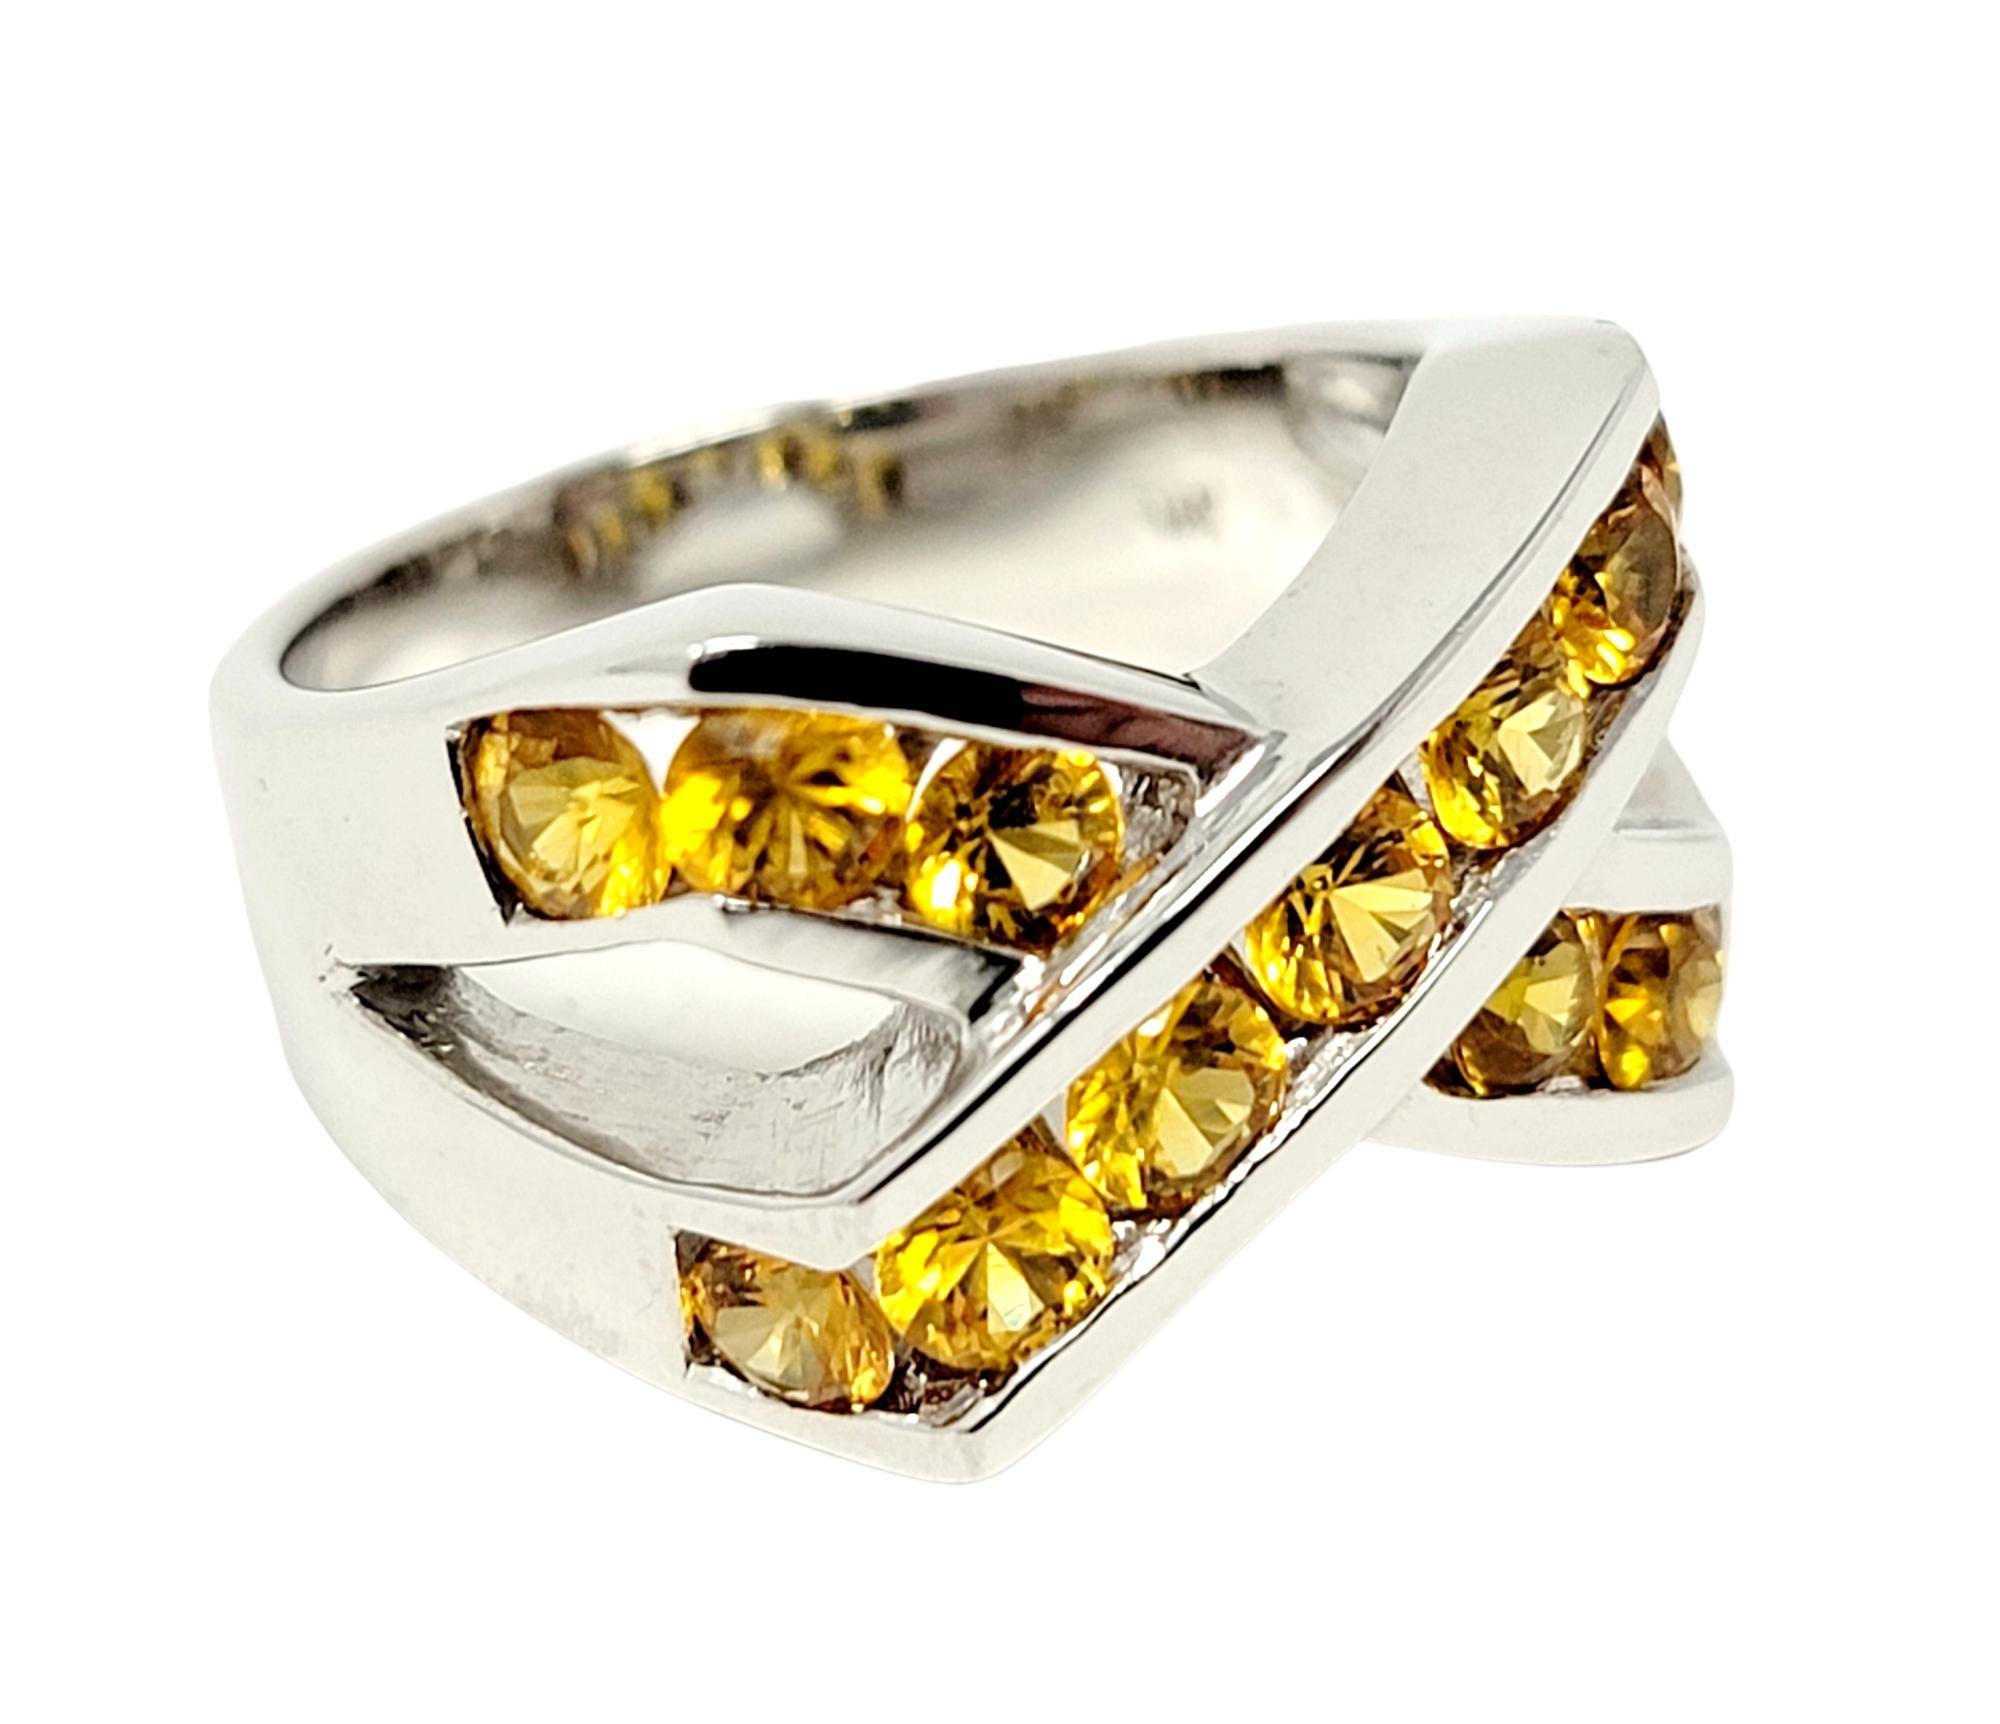 Ring size: 7.25

Beautiful contemporary sapphire band ring bursting with bold color and sparkle. 

Ring Type: Band
Ring size: 7.25
Metal: 14K White Gold
Weight: 9.4 grams
Natural Sapphires: 2.00 ctw 
Stone cut: Round
Stone color: Yellow
Band Width: